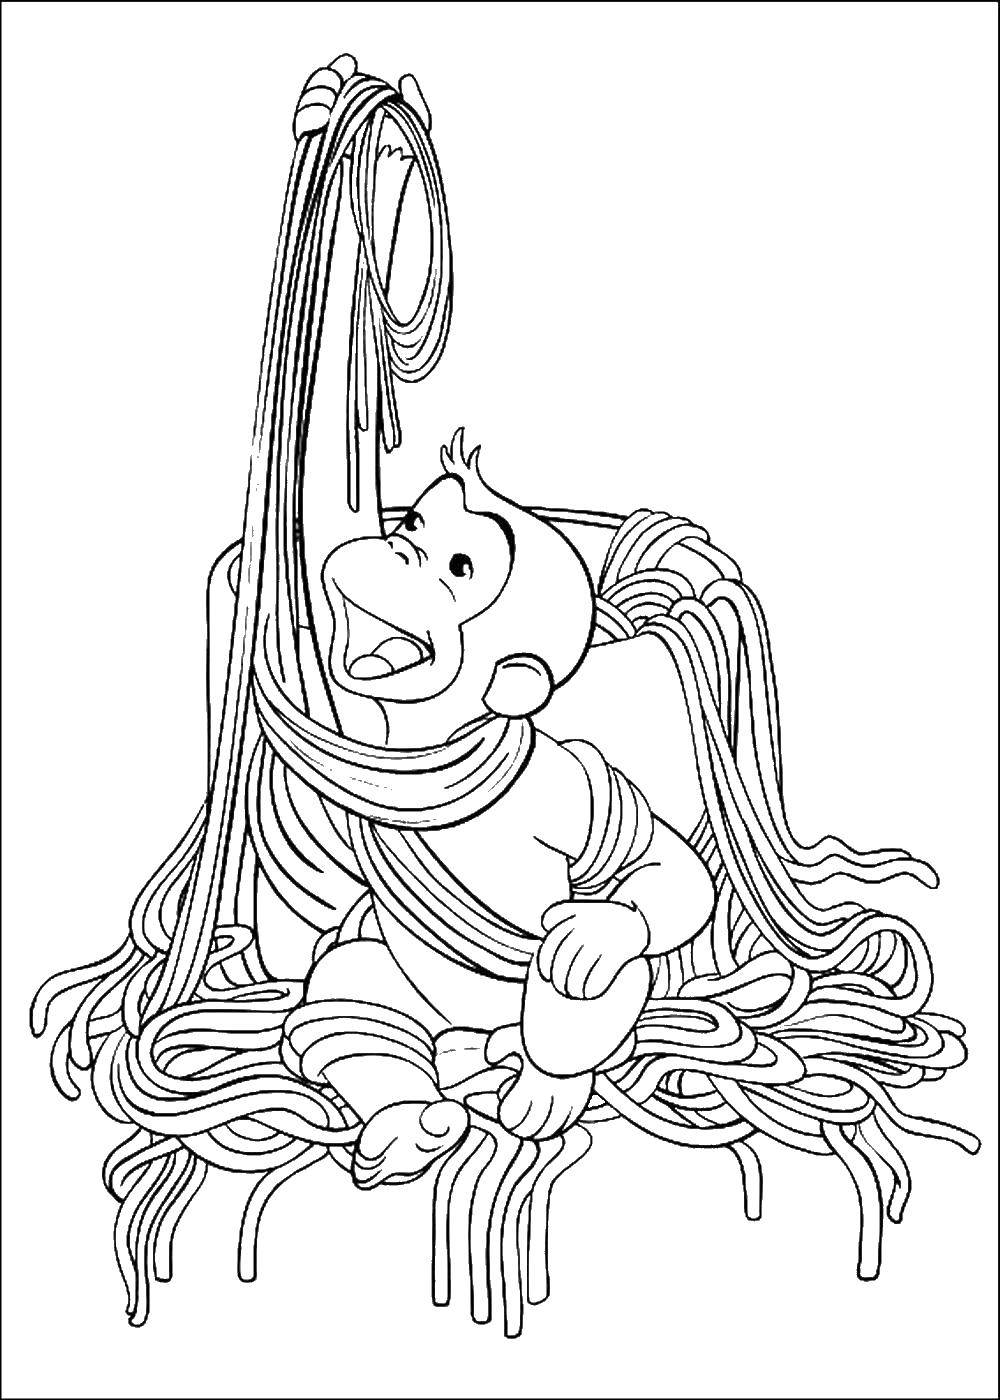 Coloring The monkey and spaghetti. Category coloring. Tags:  spaghetti, monkey, plate.